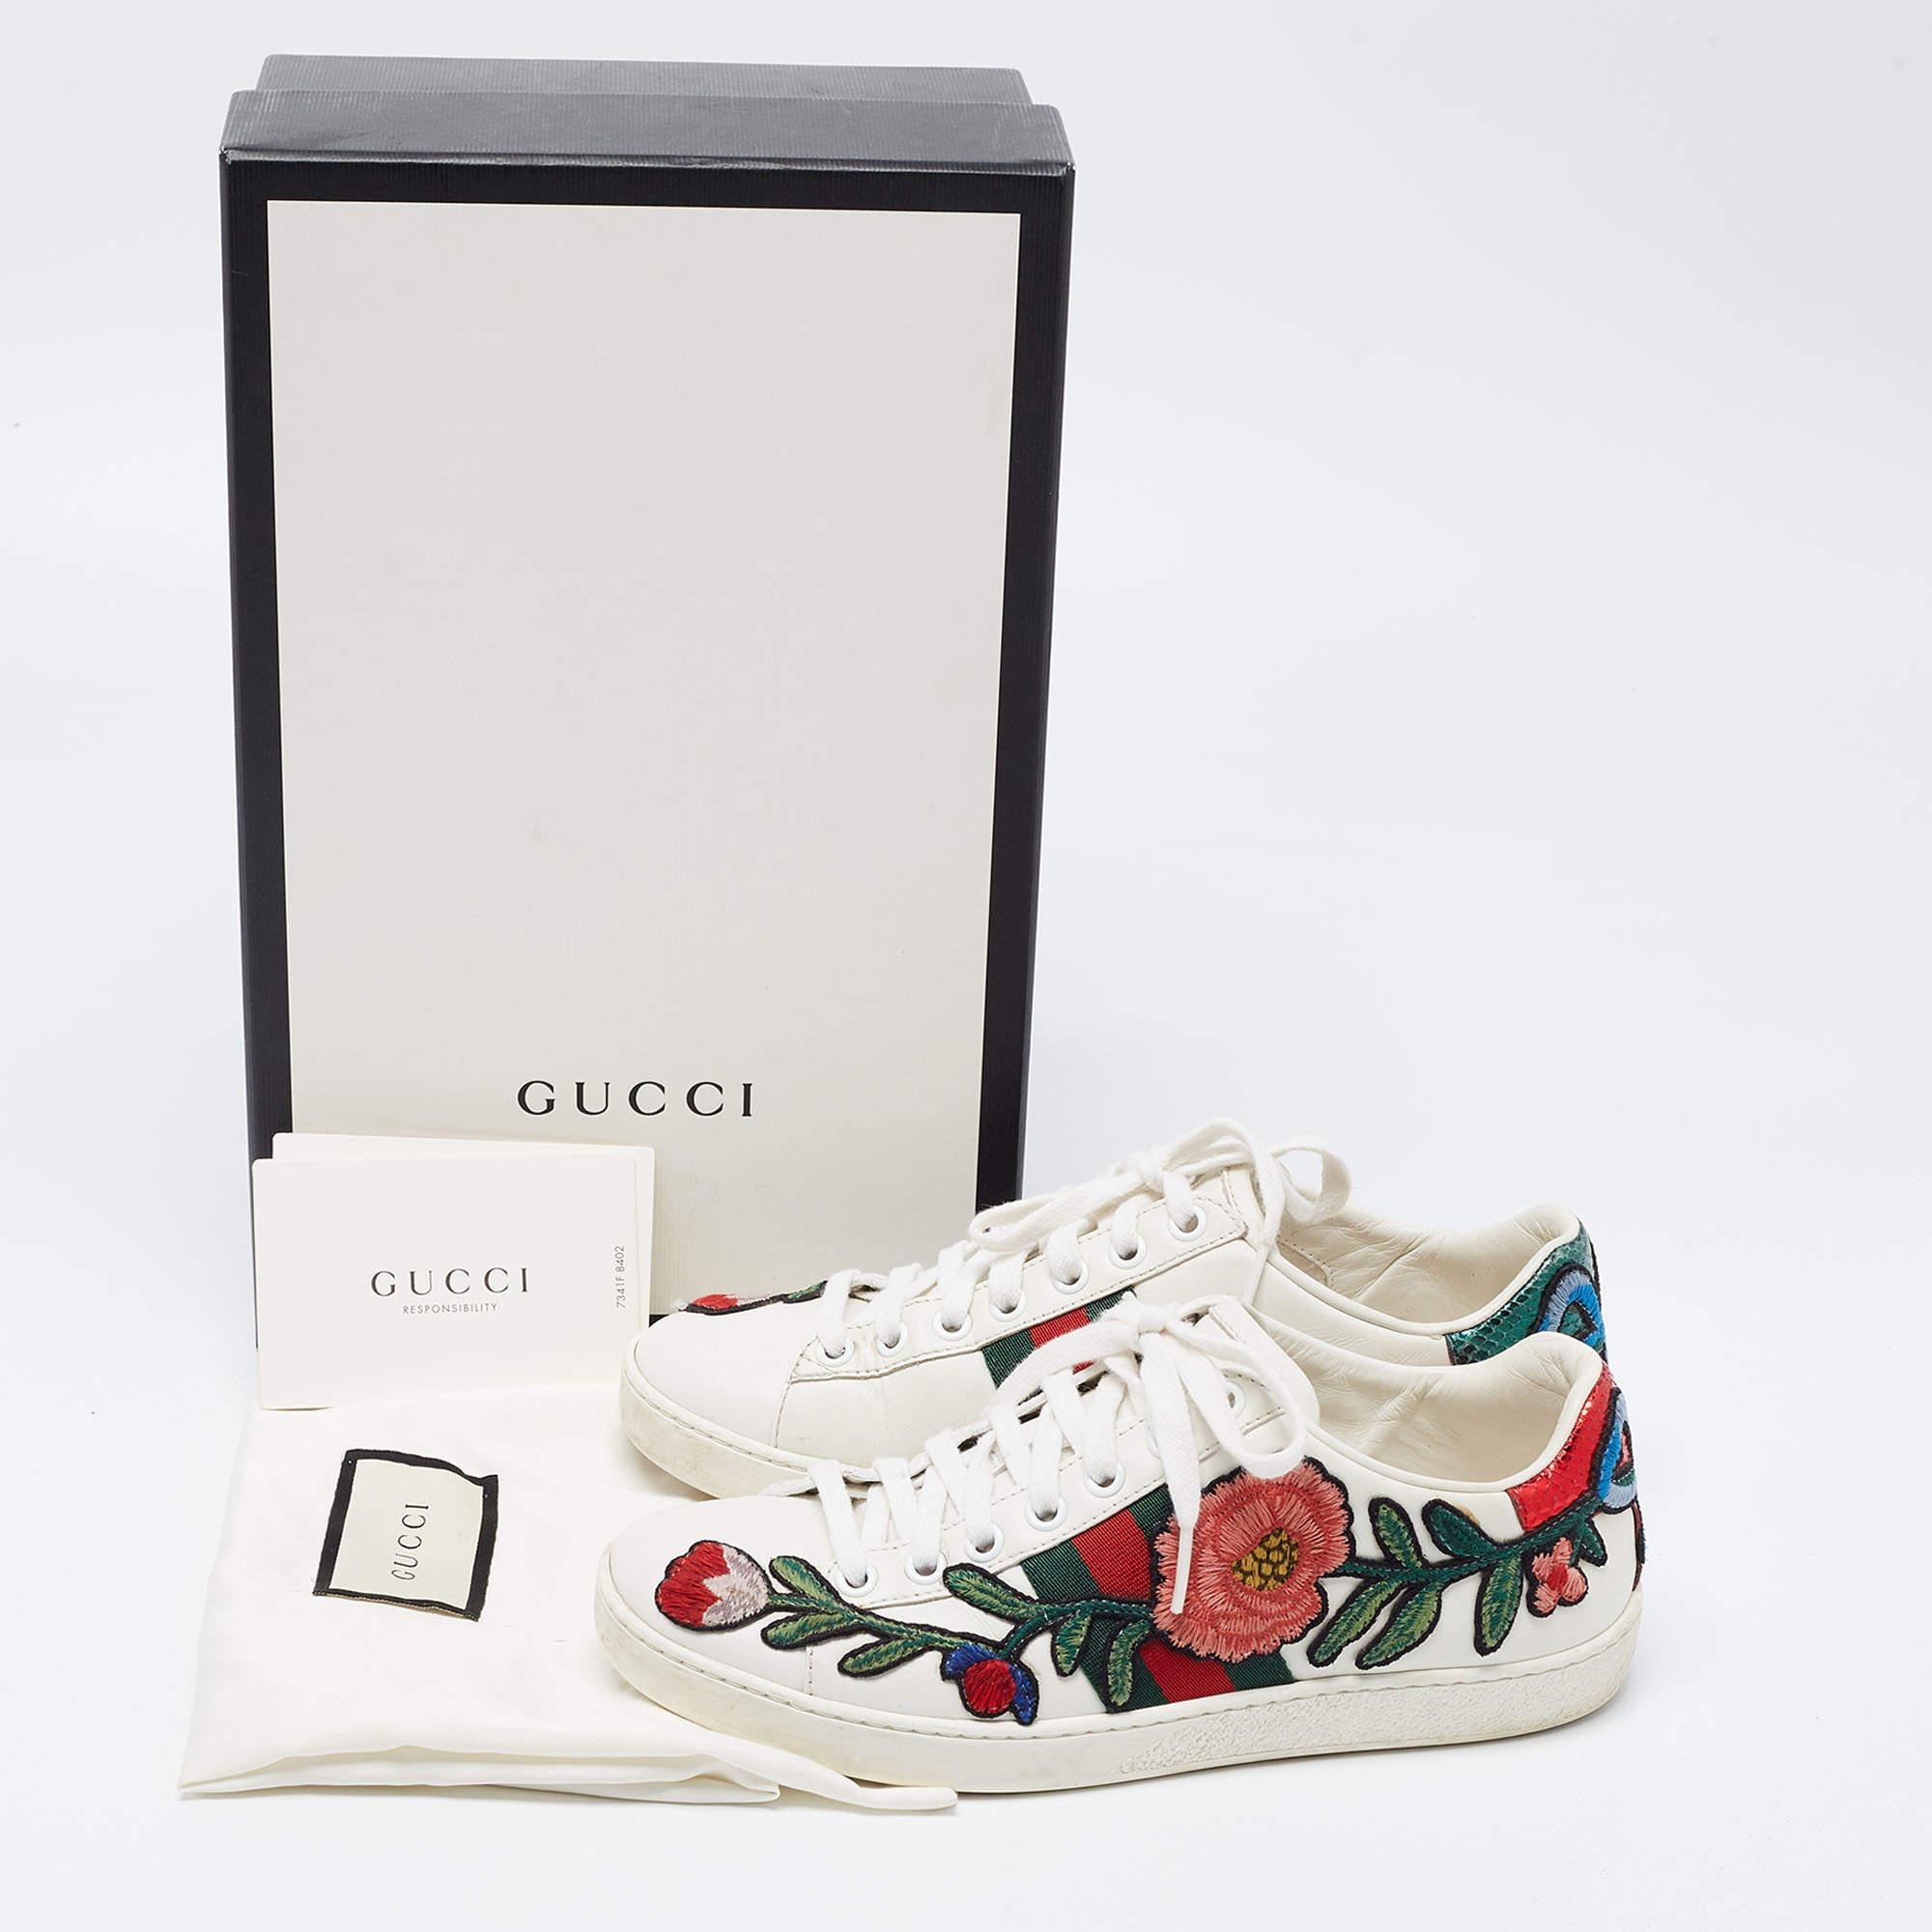 Gucci White Leather Embroidered Floral Ace Sneakers Size 34.5 5